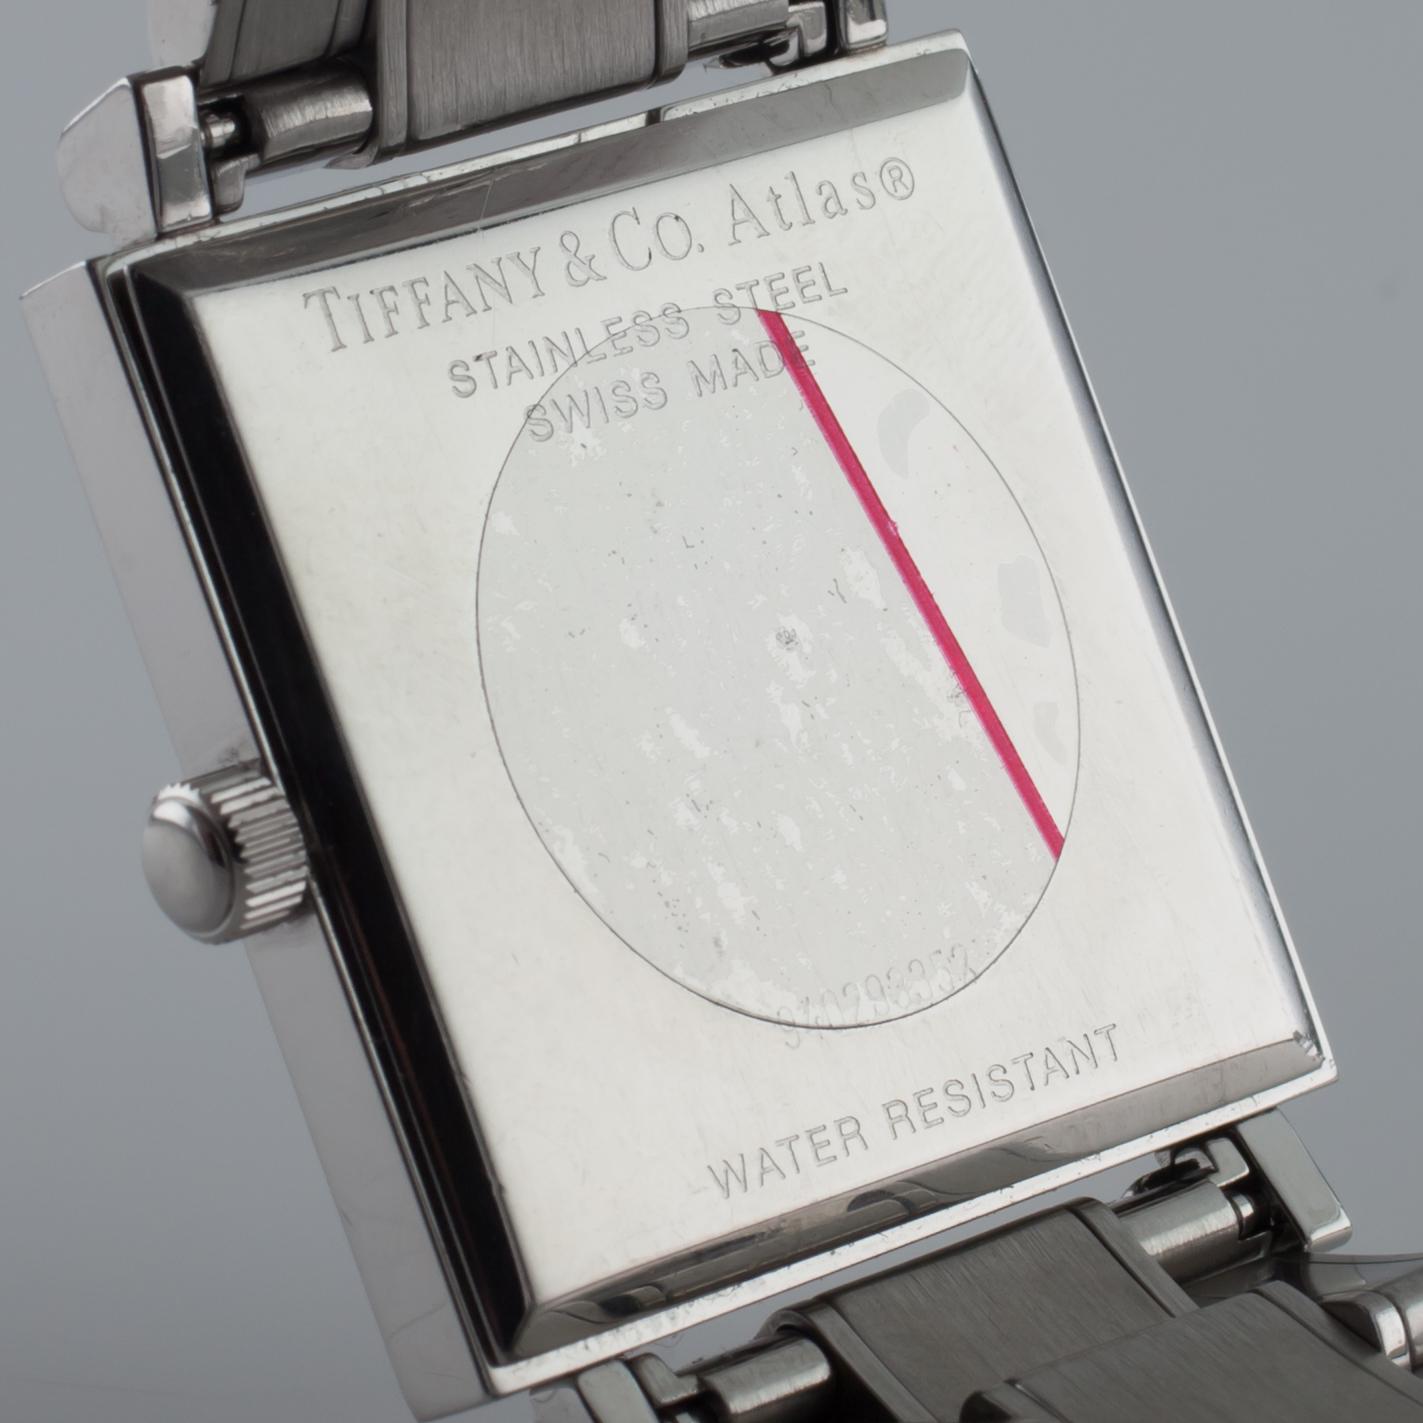 Tiffany & Co. Atlas Quartz Square Watch Stainless Steel W/ Date In Good Condition For Sale In Sherman Oaks, CA